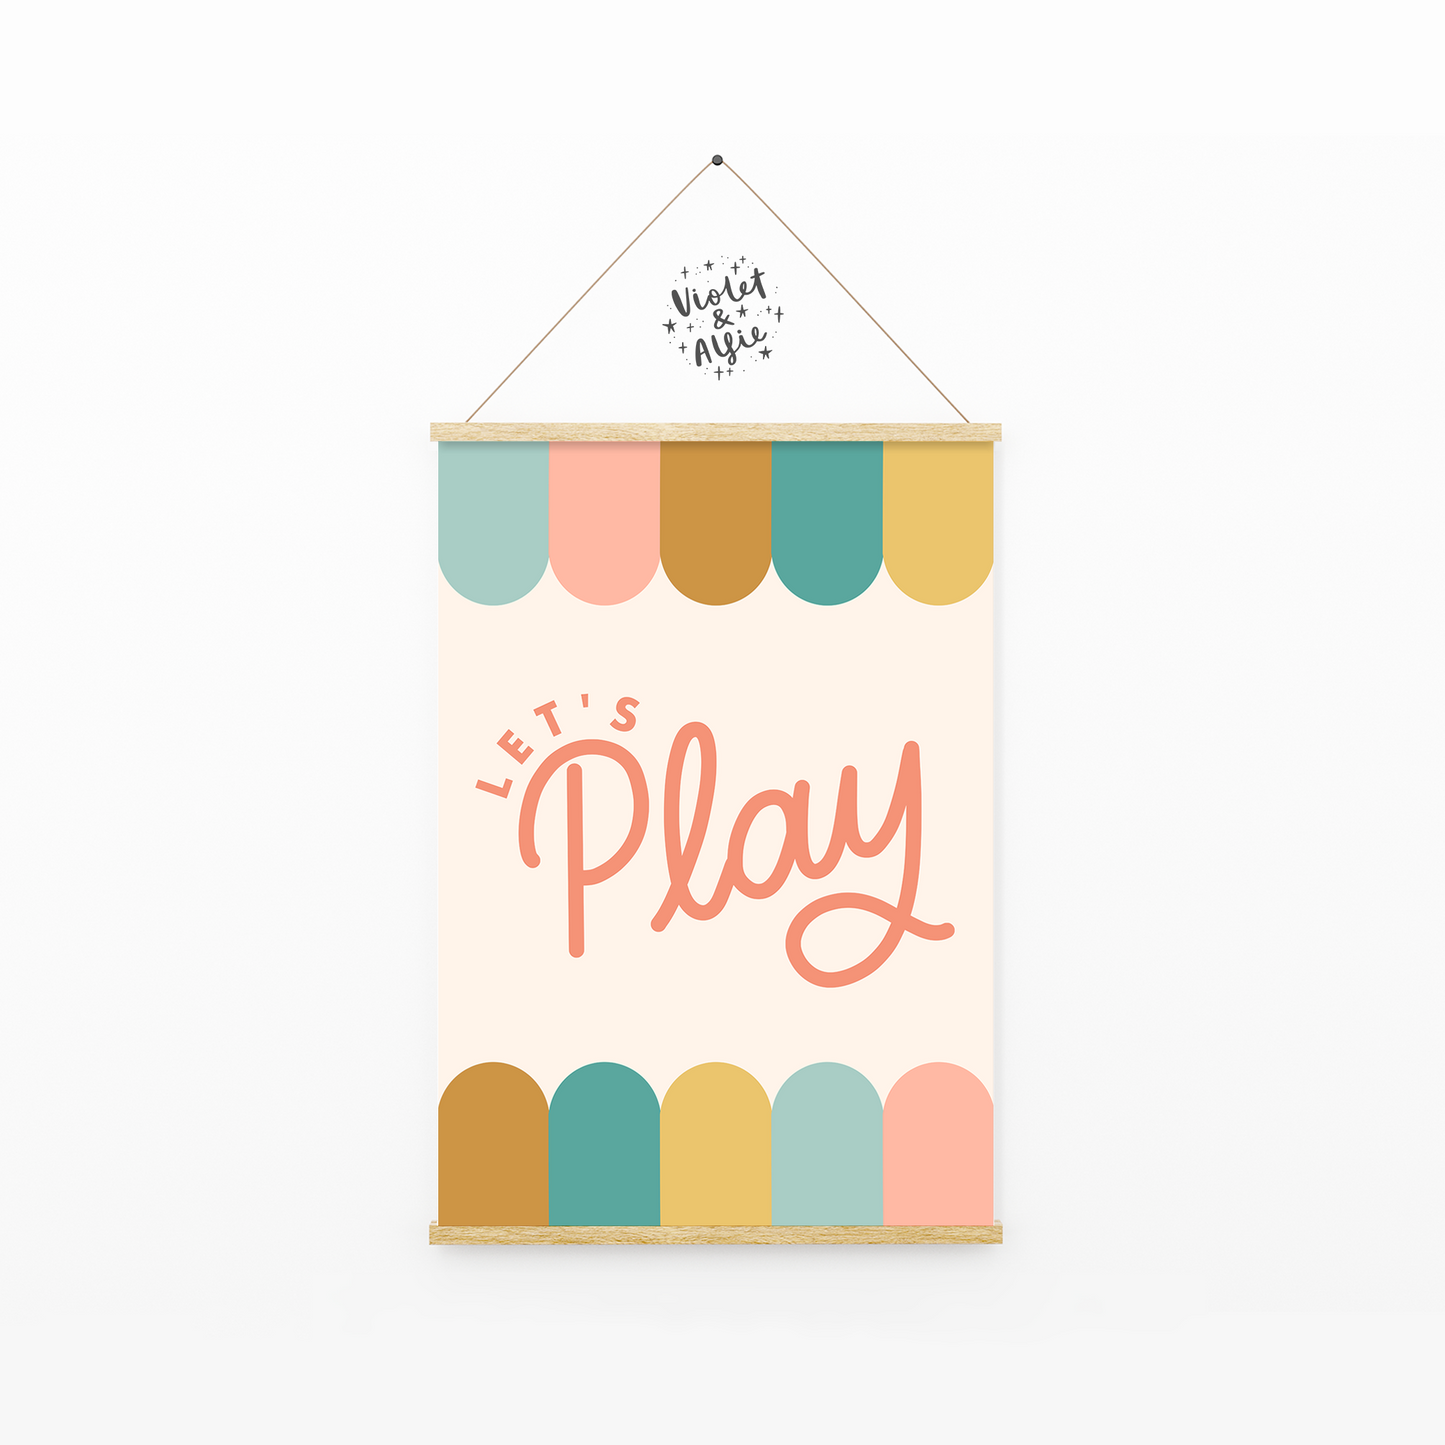 Let's play print, typographic wall art for child's bedroom or nursery, 